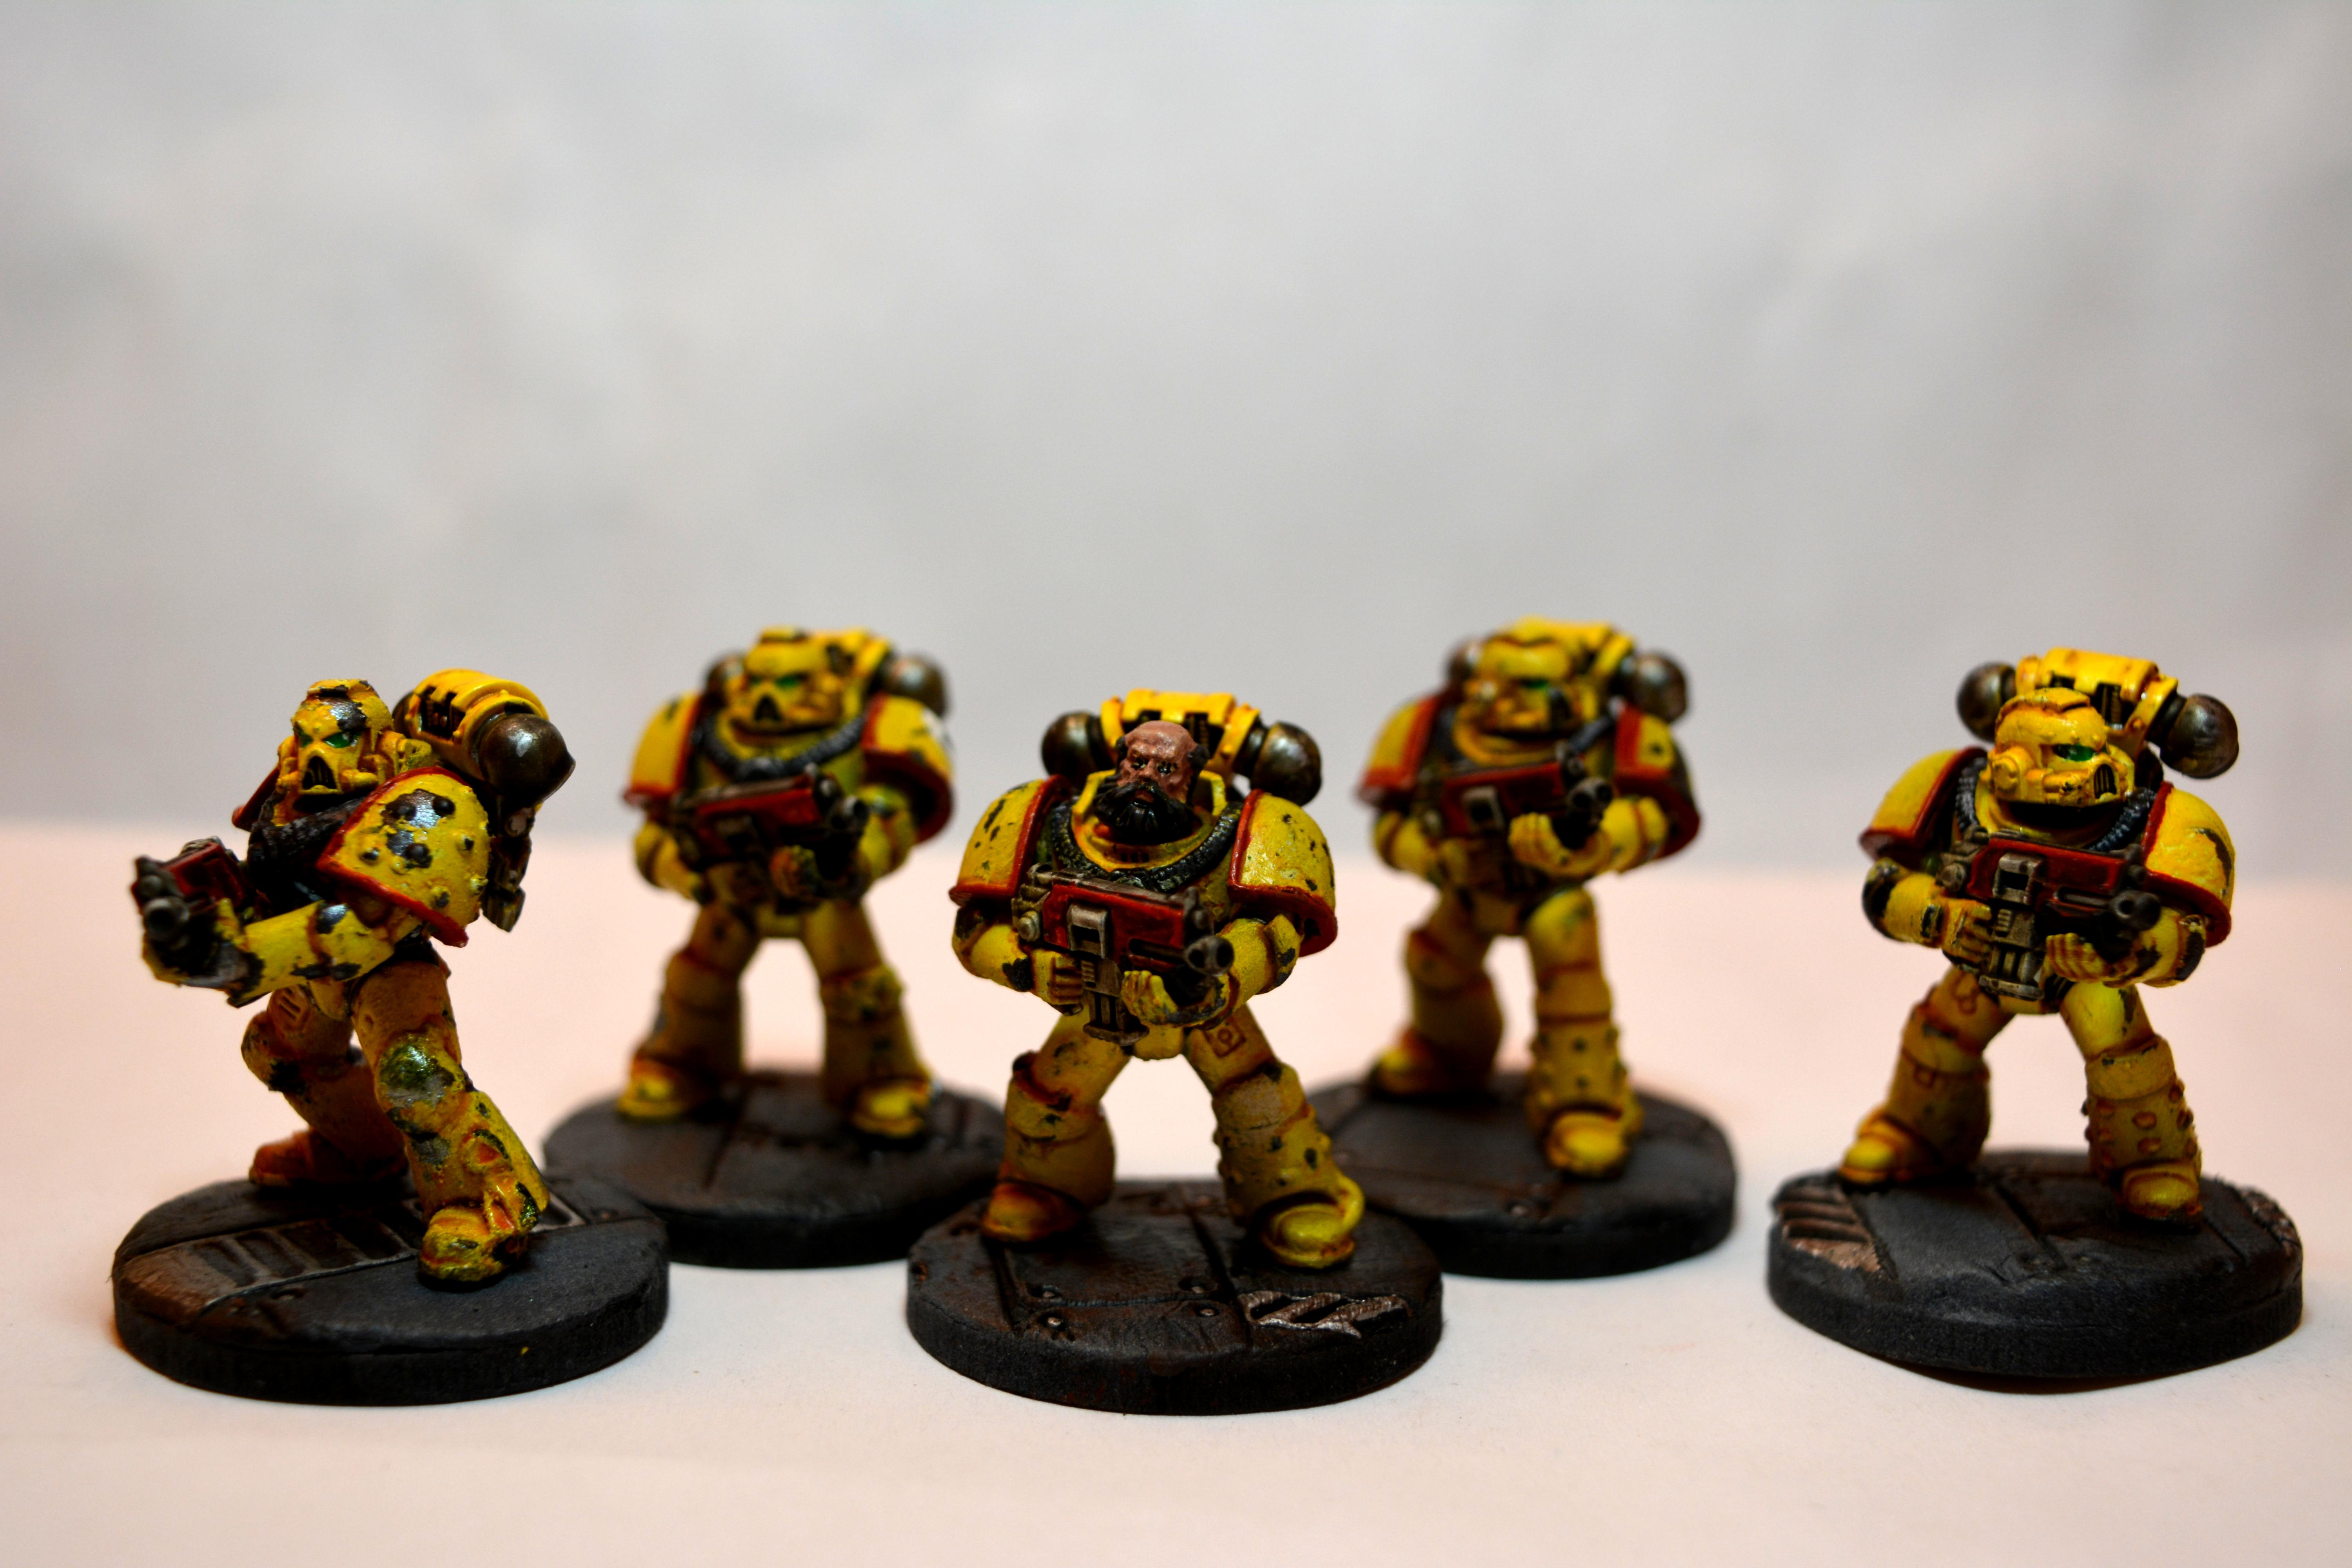 Fists, Imperial, Imperial Fists, Space, Space Marines, Warhammer 40,000, Warhammer Fantasy